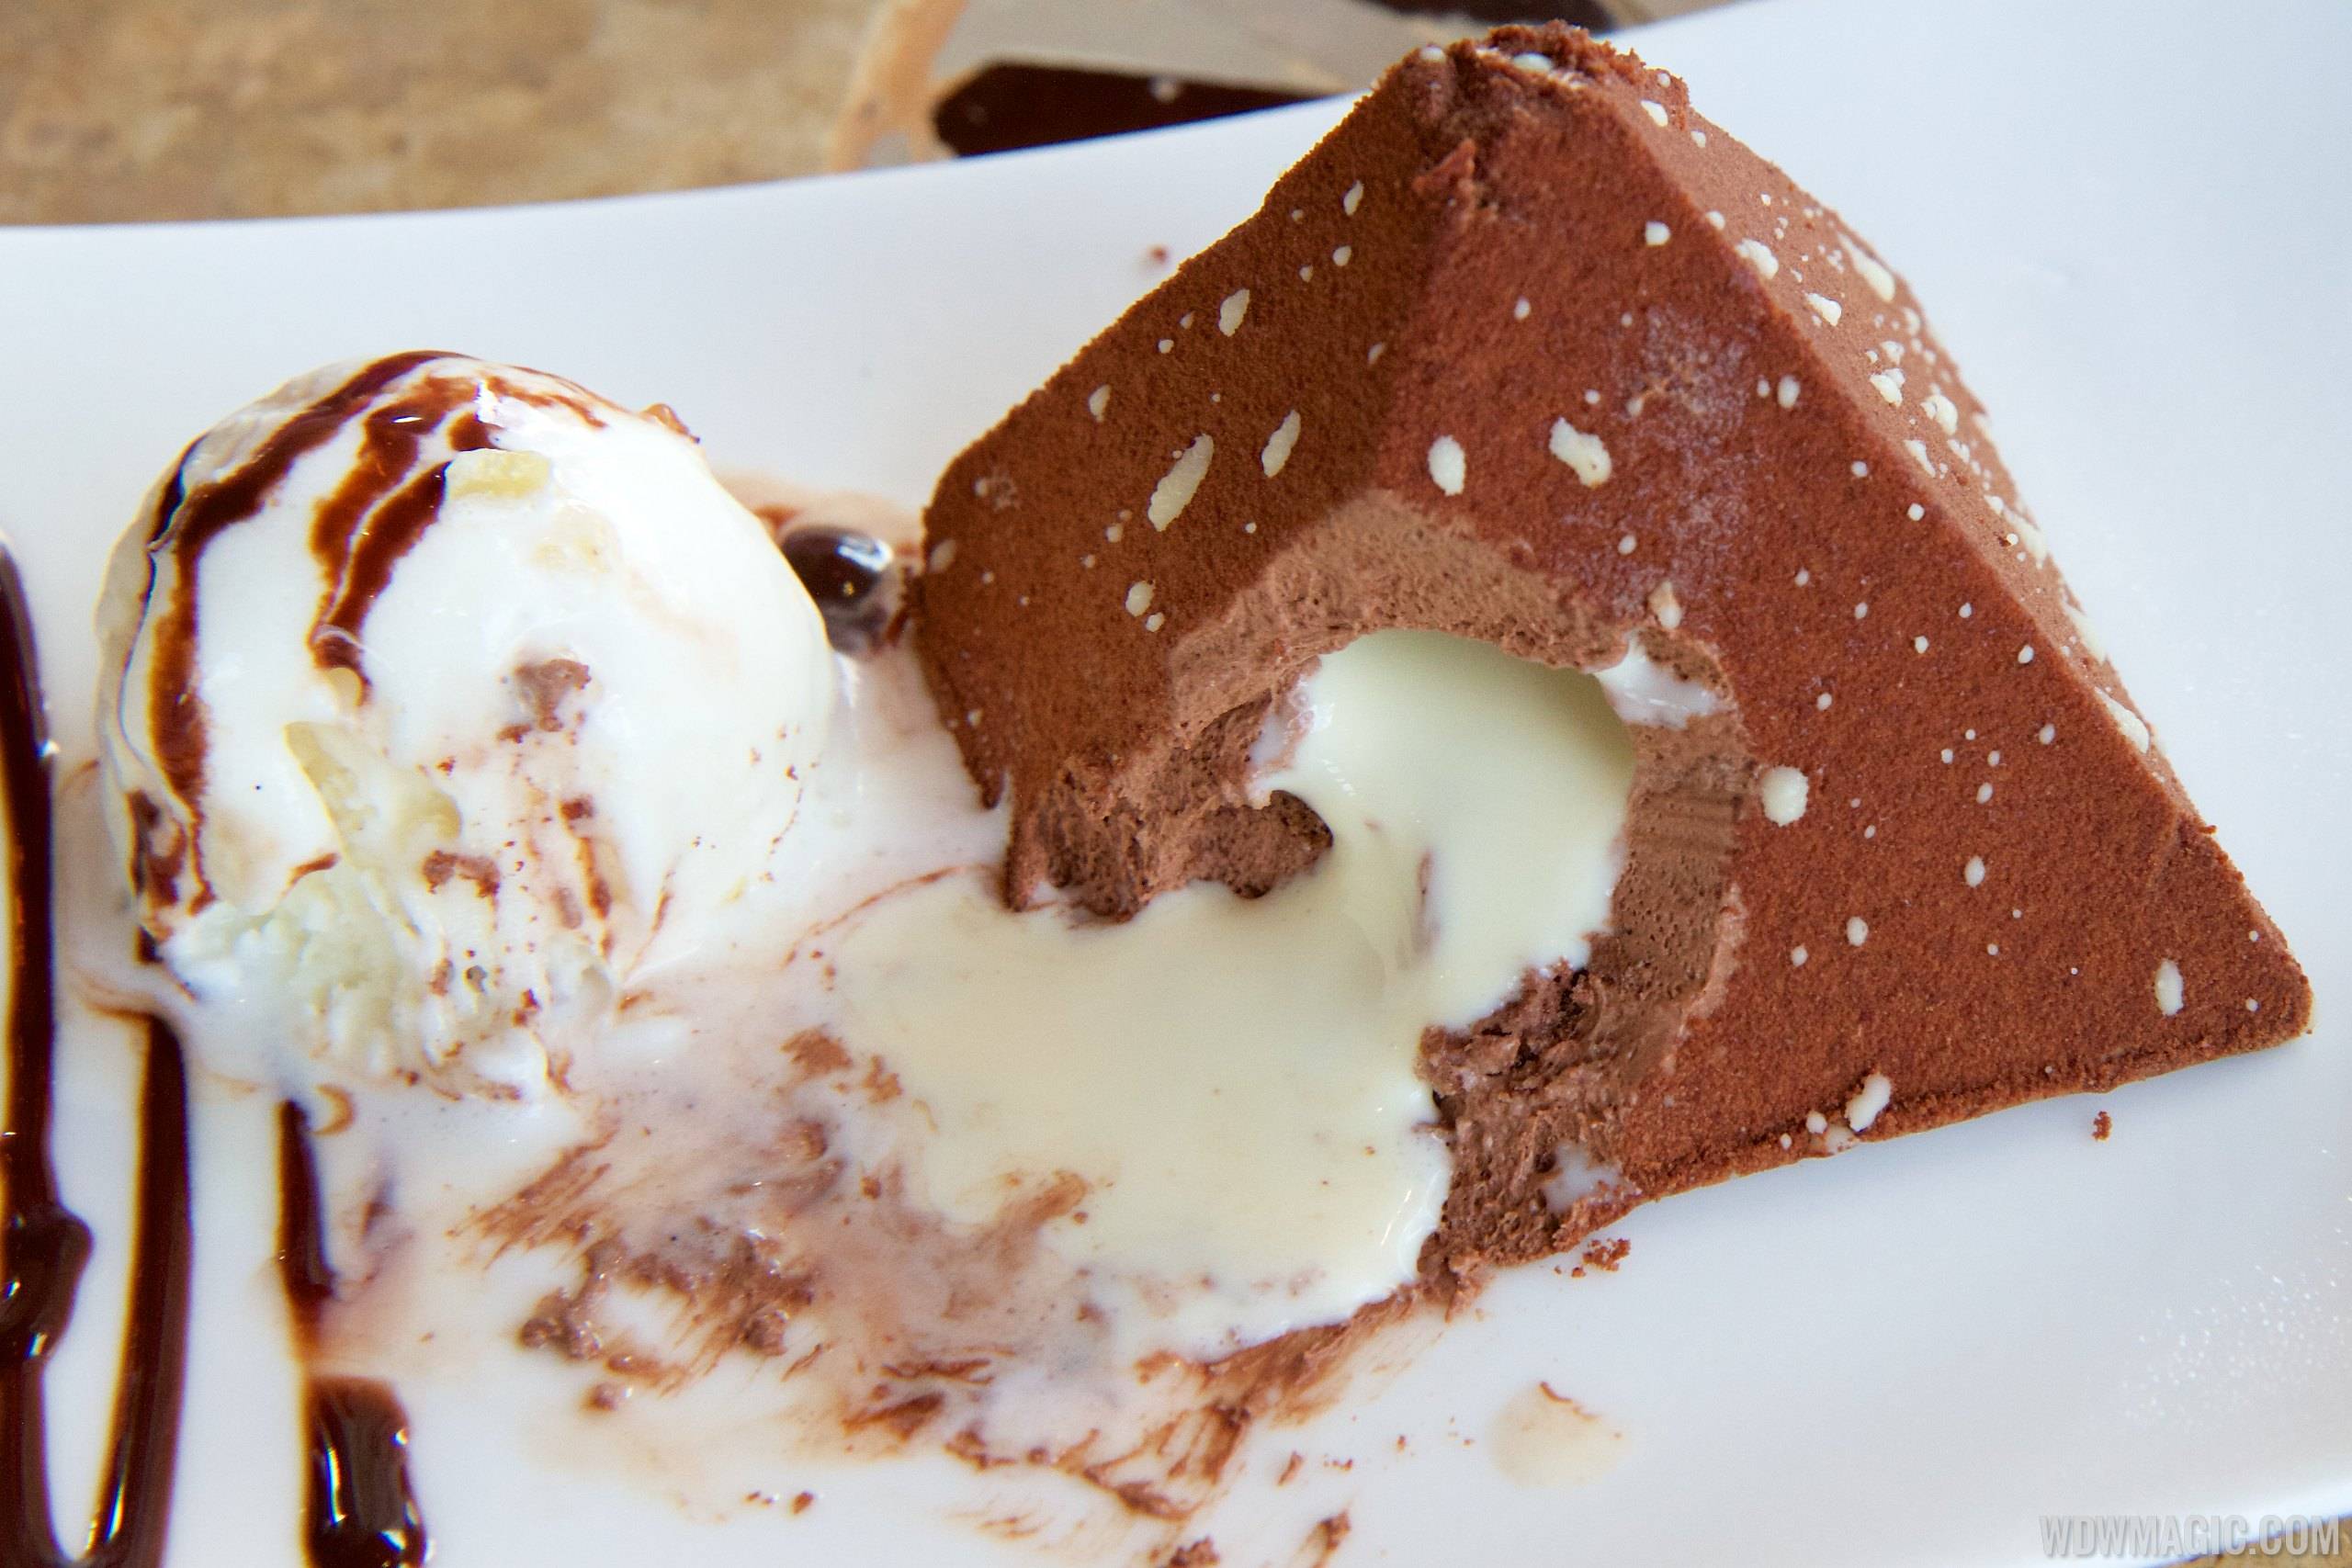 Spice Road Table - Chocolate Pyramid with white chocolate center and almond ice cream $7